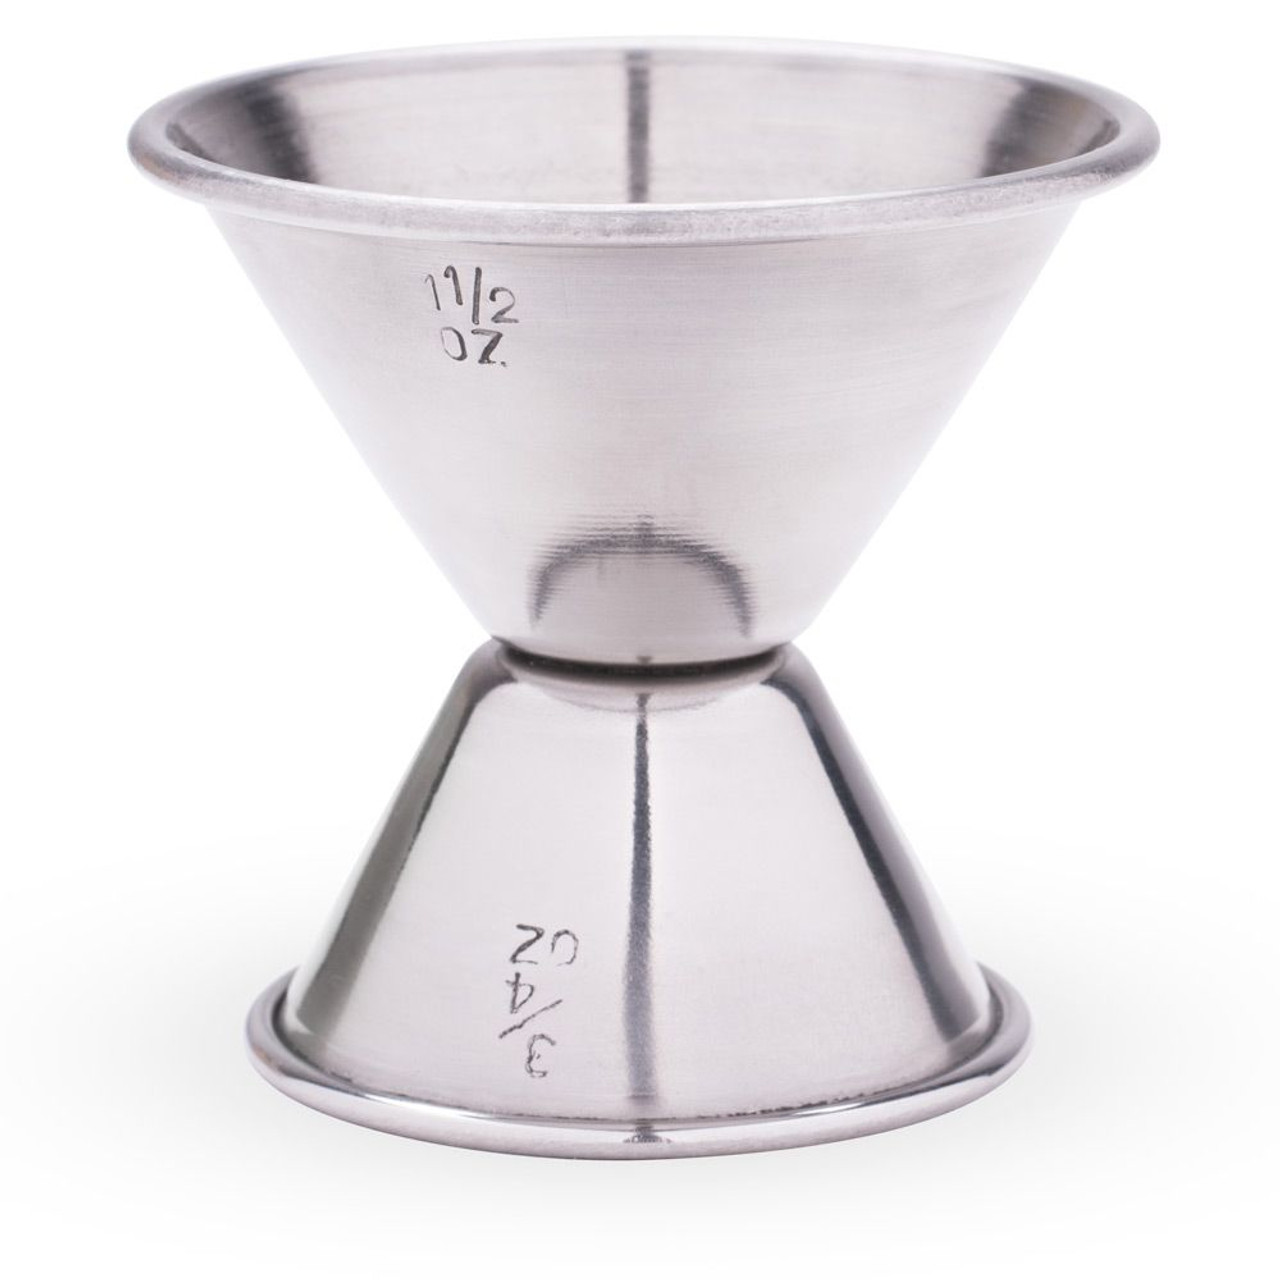 This Top-Rated Cocktail Jigger Is $10 at